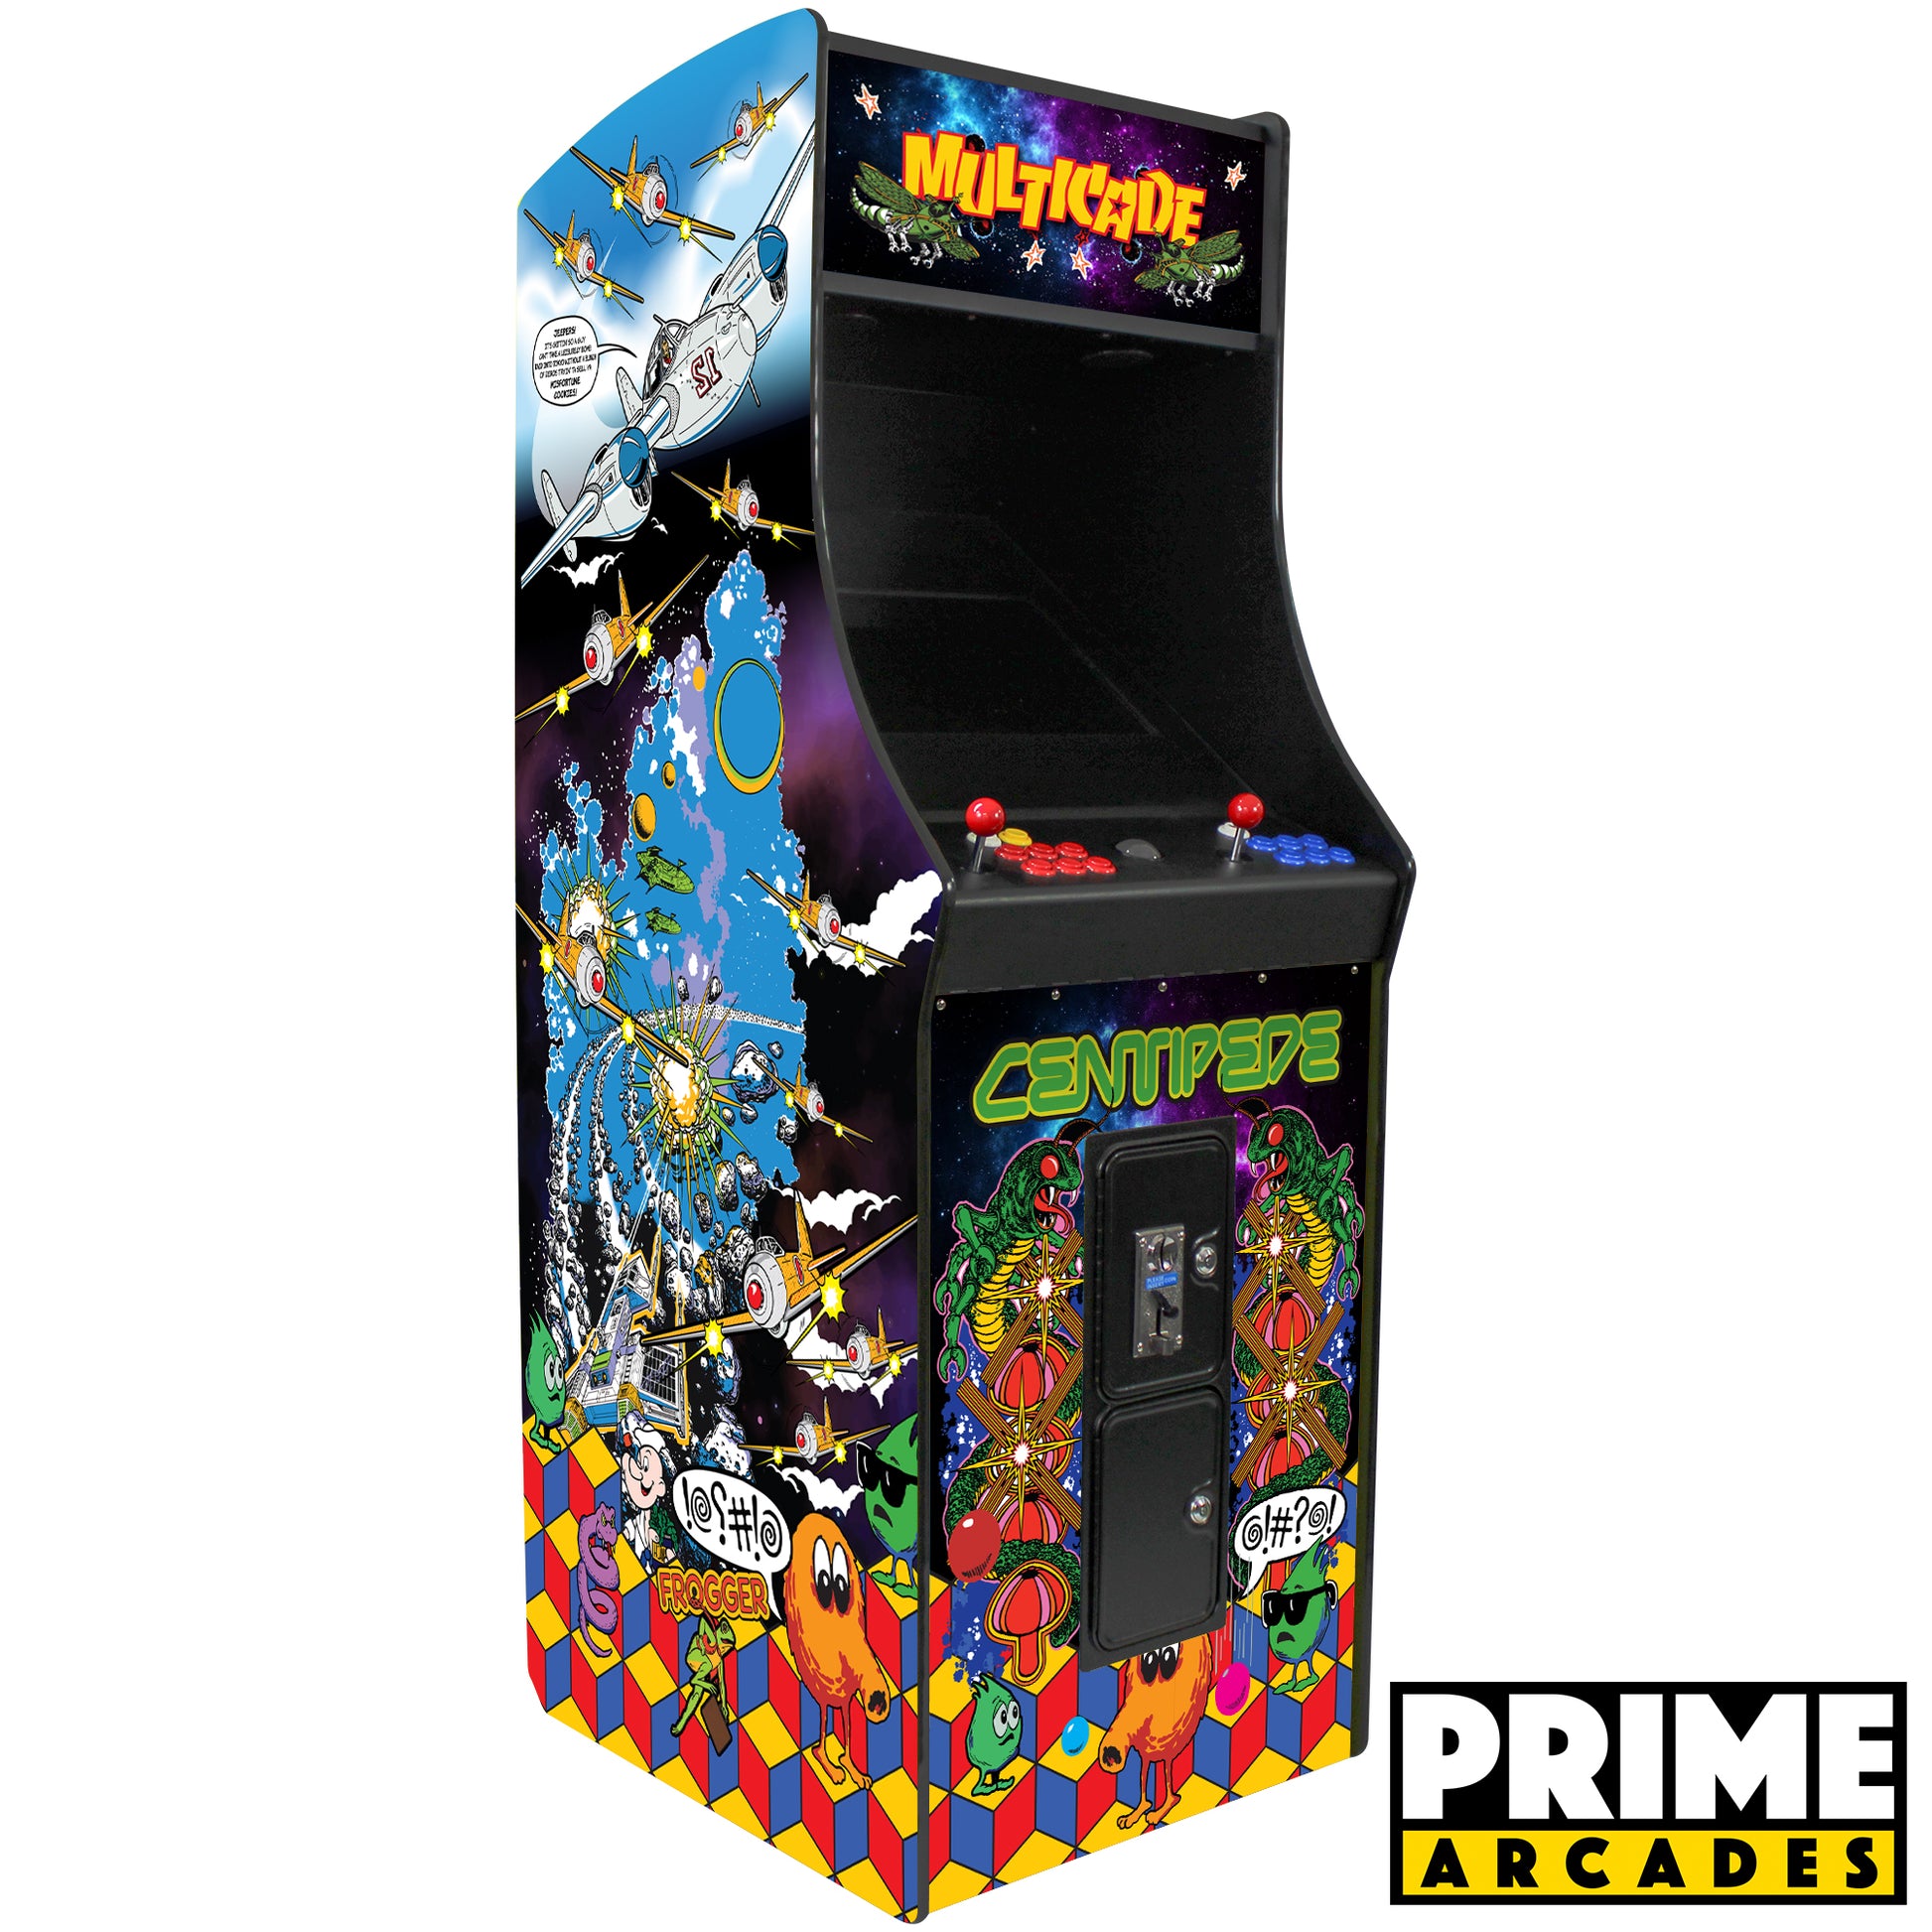 412 Games in 1 Stand Up Arcade - Prime Arcades Inc